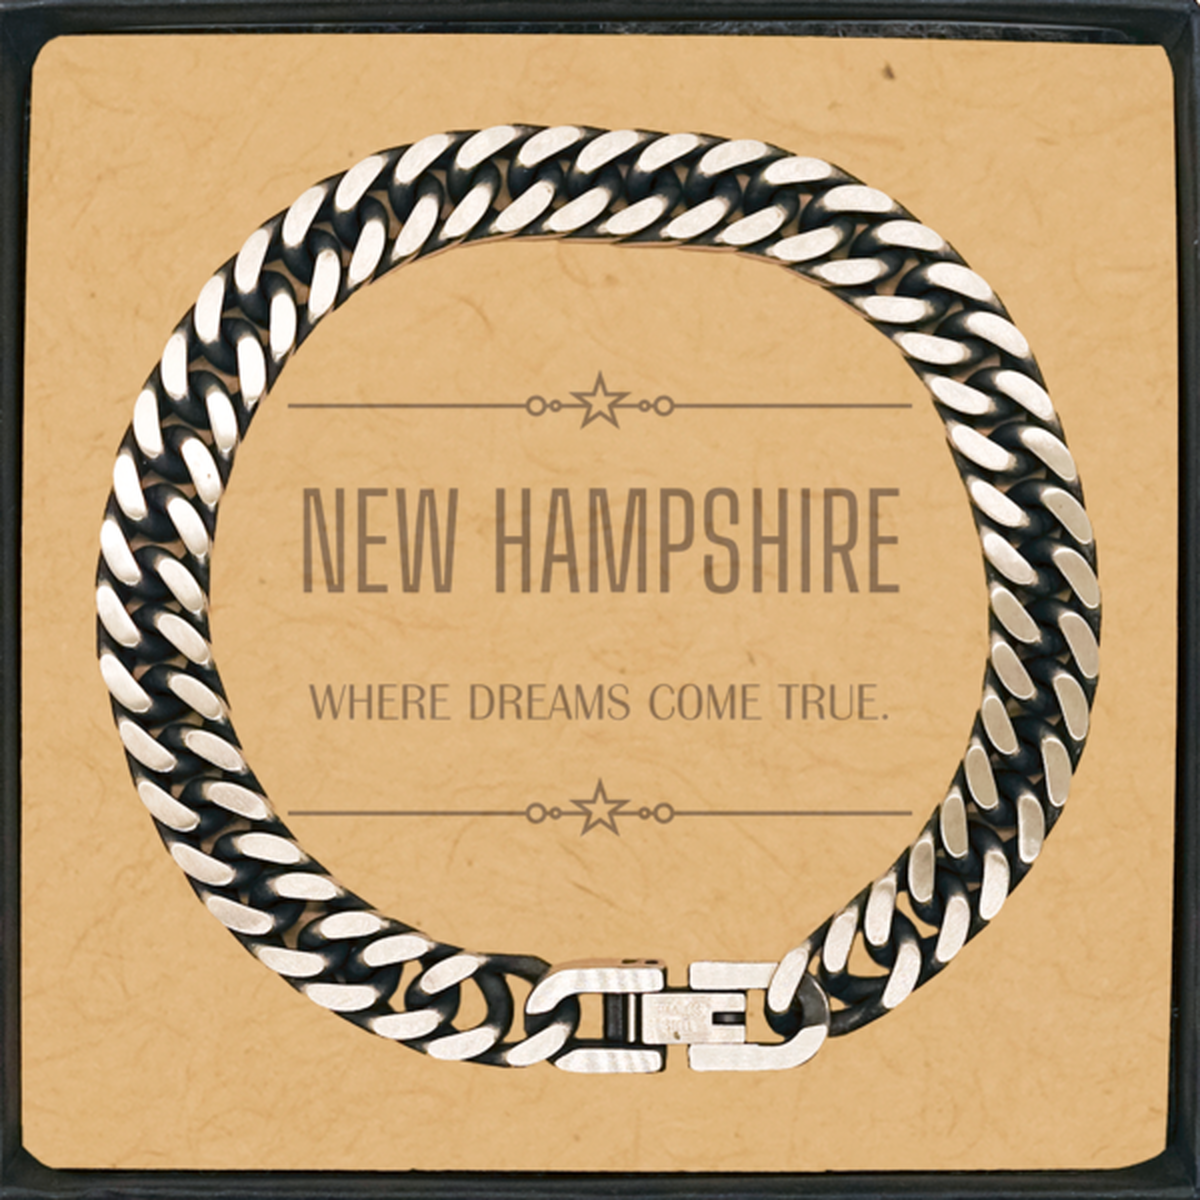 Love New Hampshire State Cuban Link Chain Bracelet, New Hampshire Where dreams come true, Birthday Inspirational Gifts For New Hampshire Men, Women, Friends